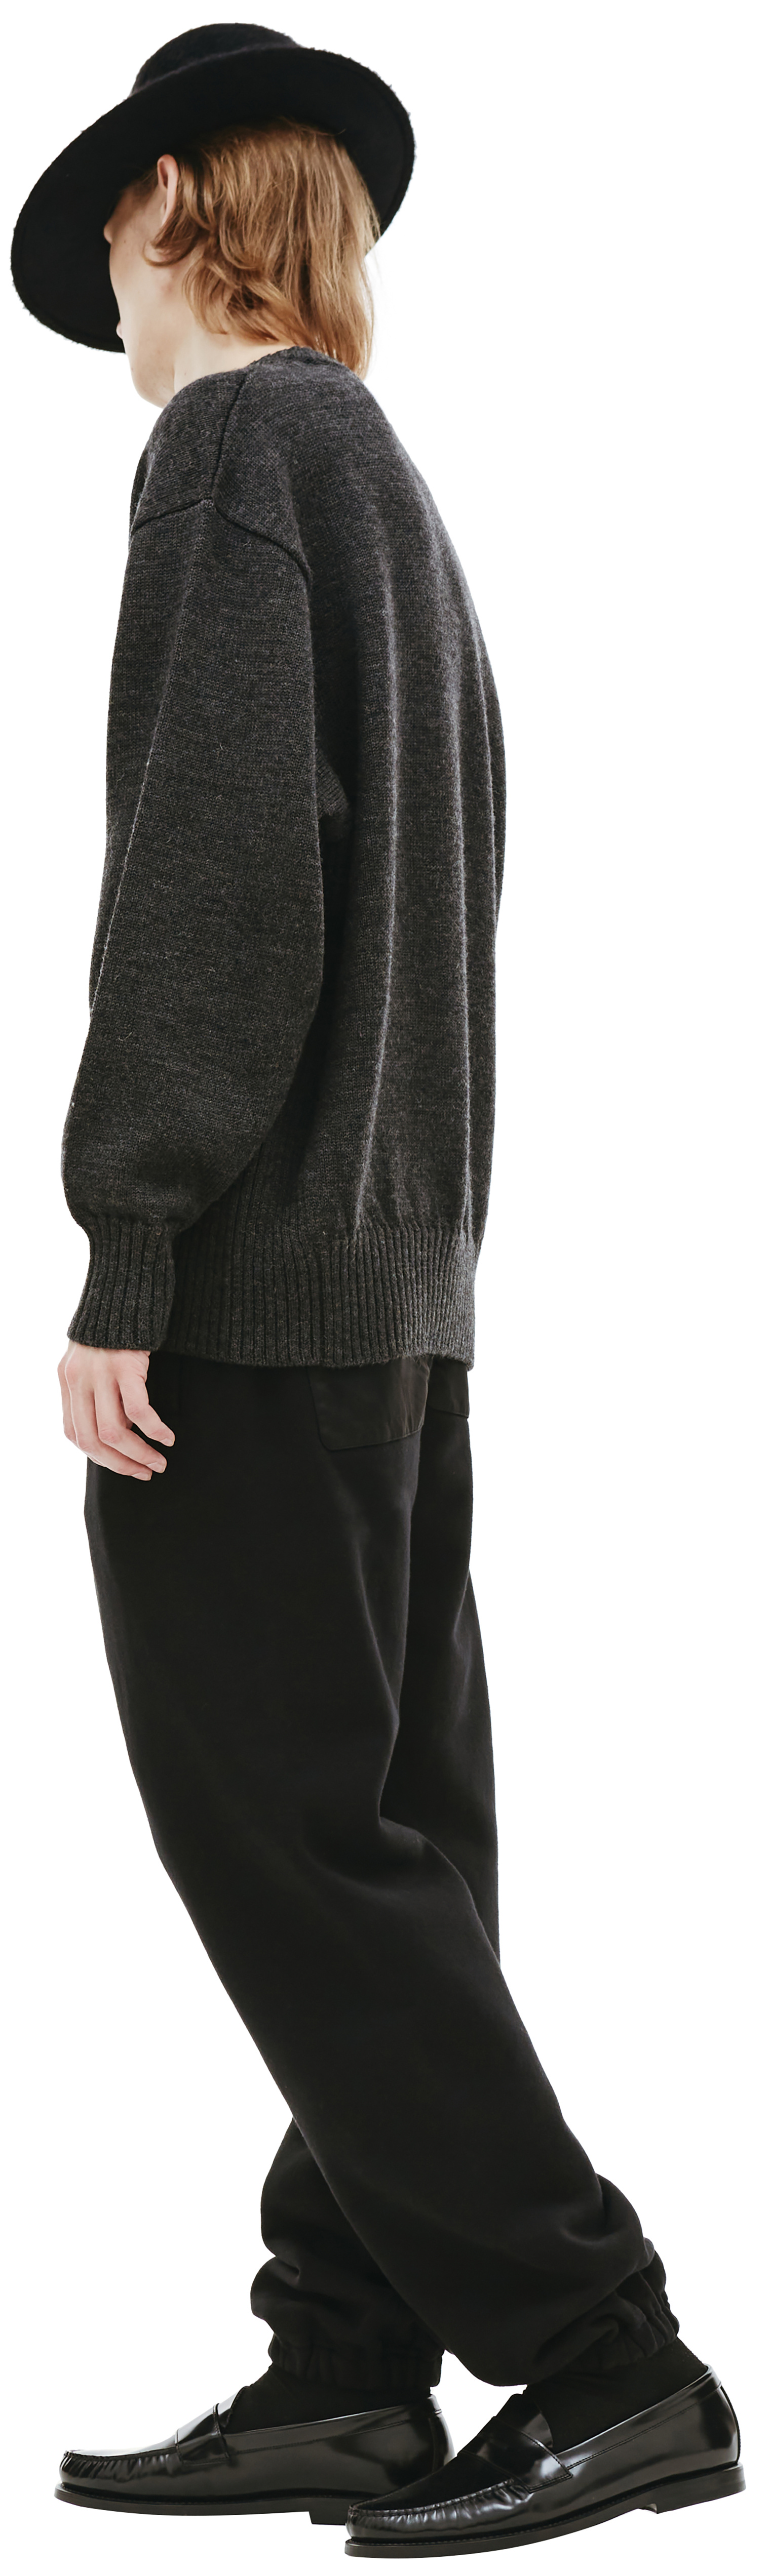 Undercover Knit Wool Sweater